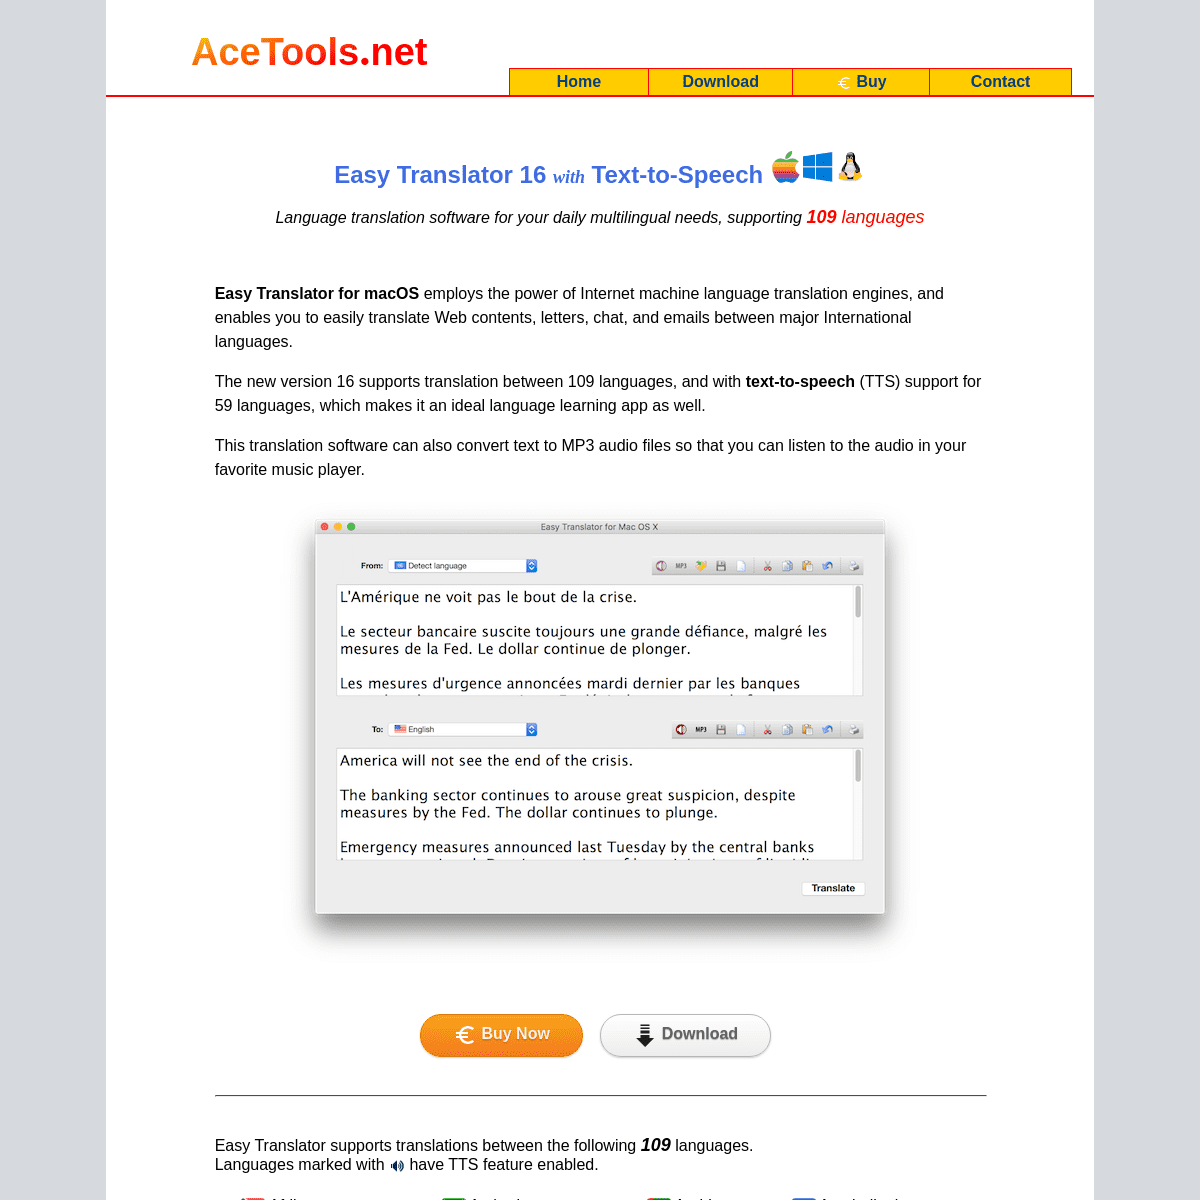 A complete backup of https://acetools.net